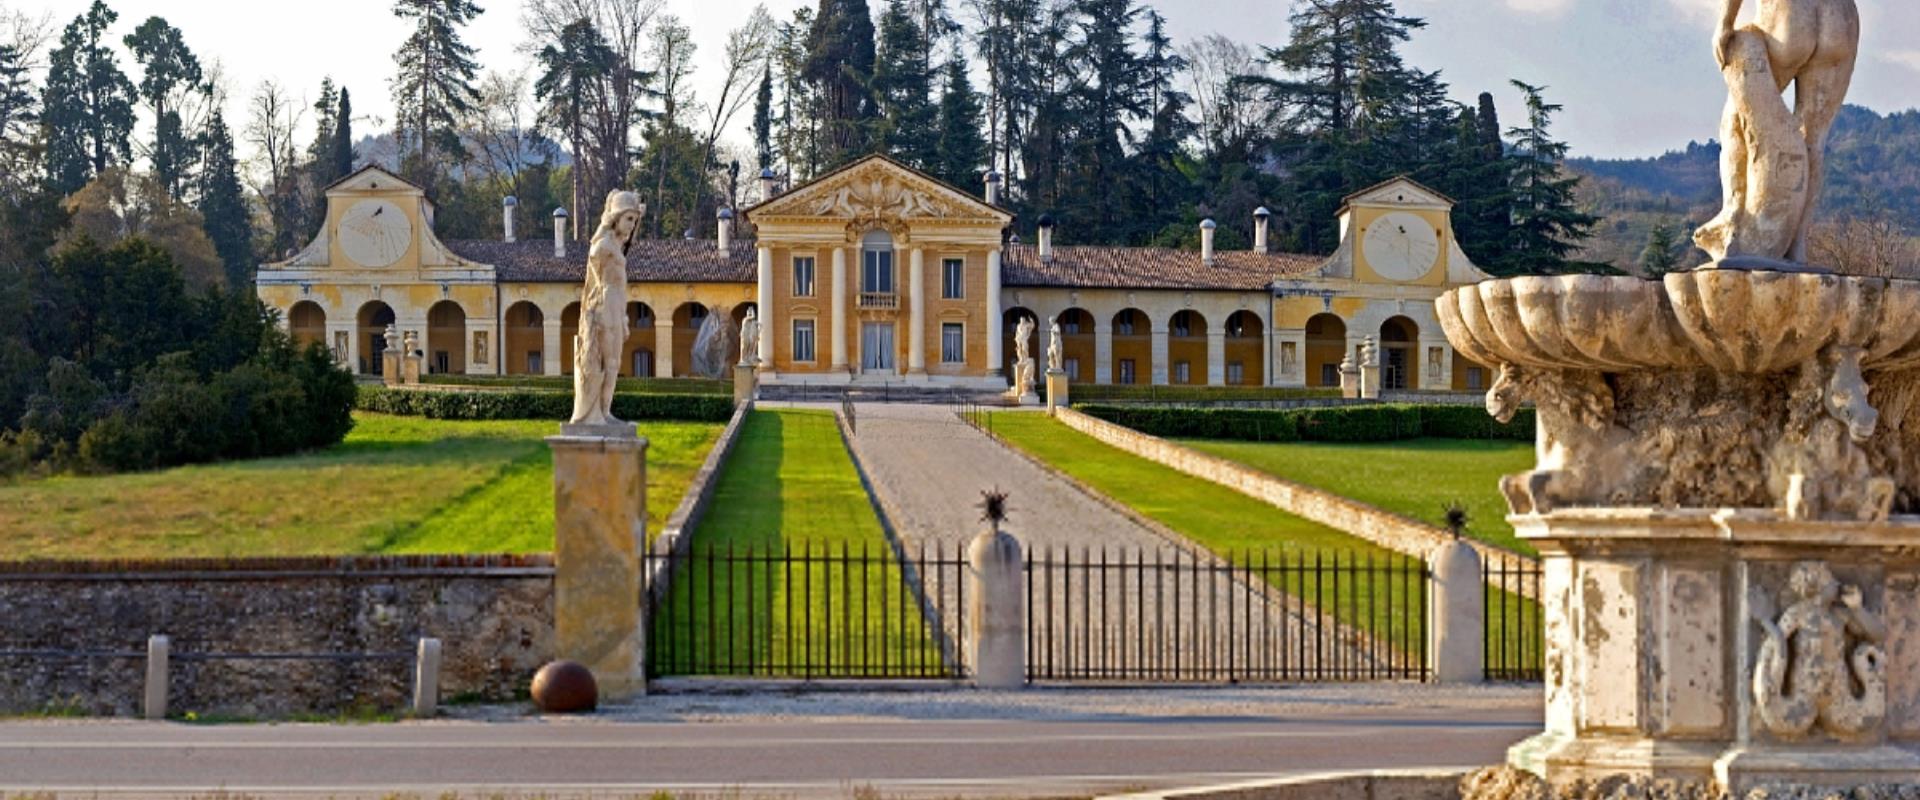 Book a stay in our 4 star hotel and discover the most beatuiful palladian villas near Treviso